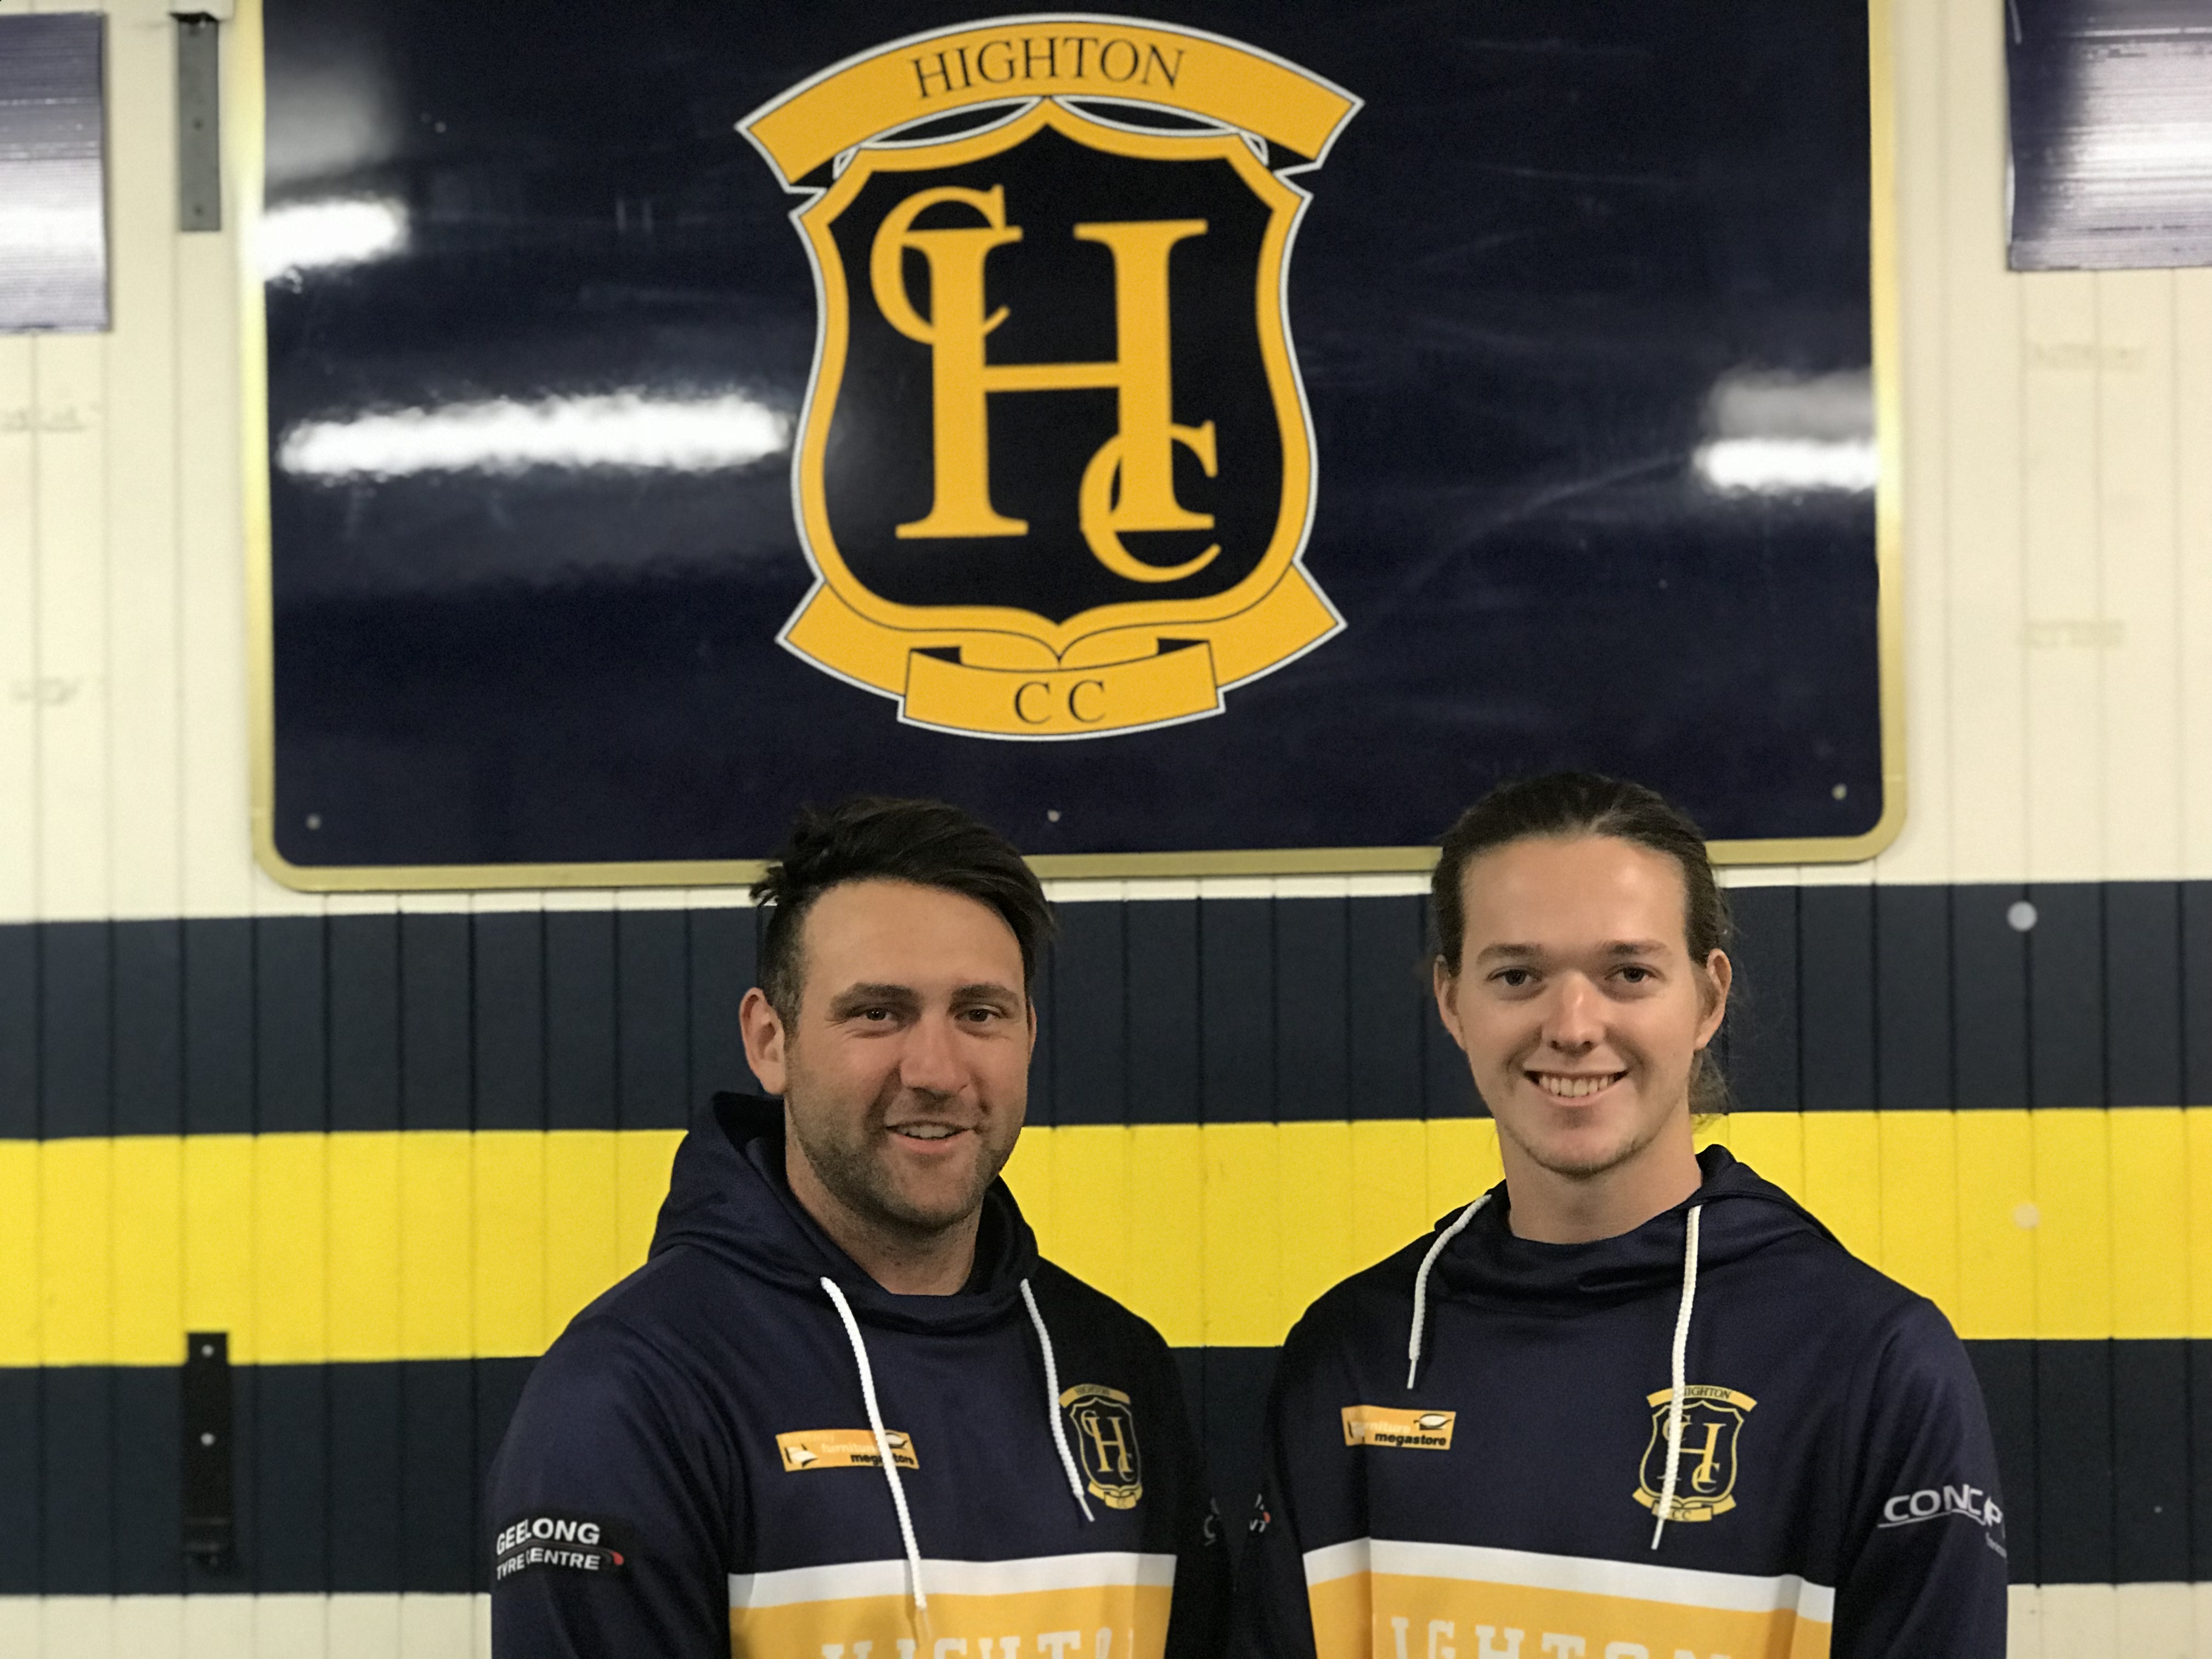 Ross and Murrell Take the Reigns At HCC